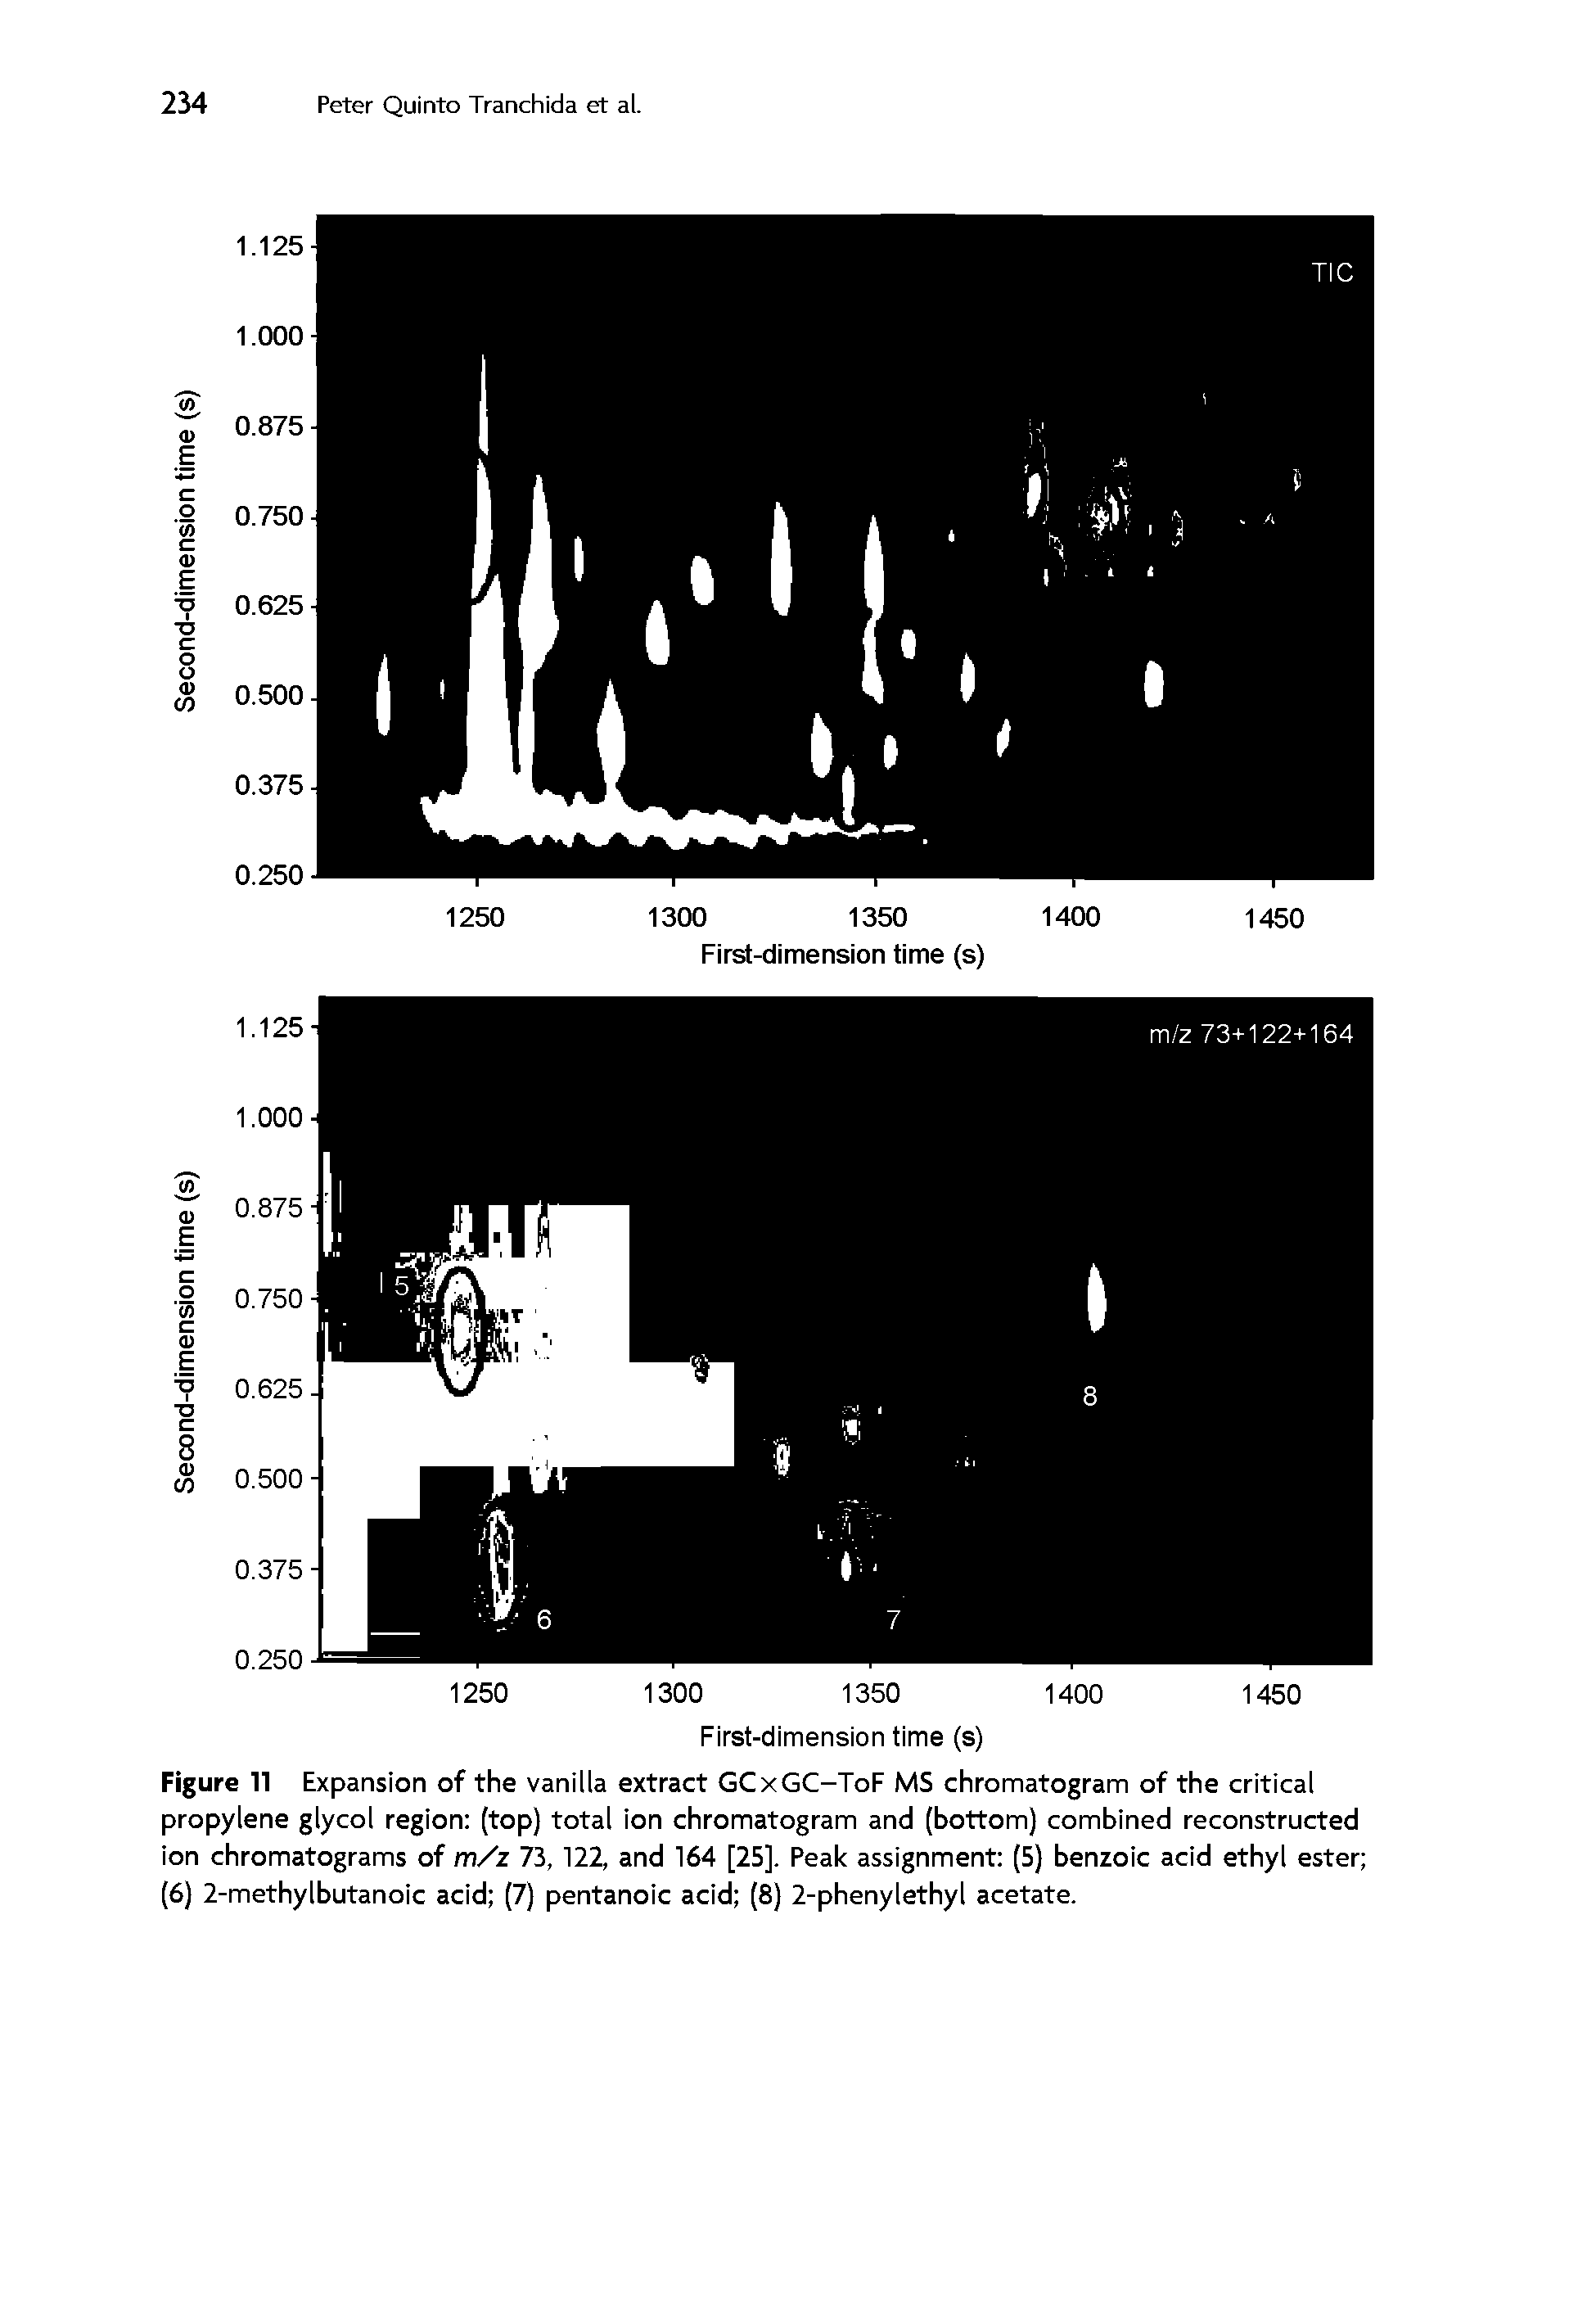 Figure 11 Expansion of the vanilla extract GCxGC-ToF MS chromatogram of the critical propylene glycol region (top) total ion chromatogram and (bottom) combined reconstructed ion chromatograms of m/z 73, 122, and 164 [25]. Peak assignment (5) benzoic acid ethyl ester (6) 2-methylbutanoic acid (7) pentanoic acid (8) 2-phenylethyl acetate.